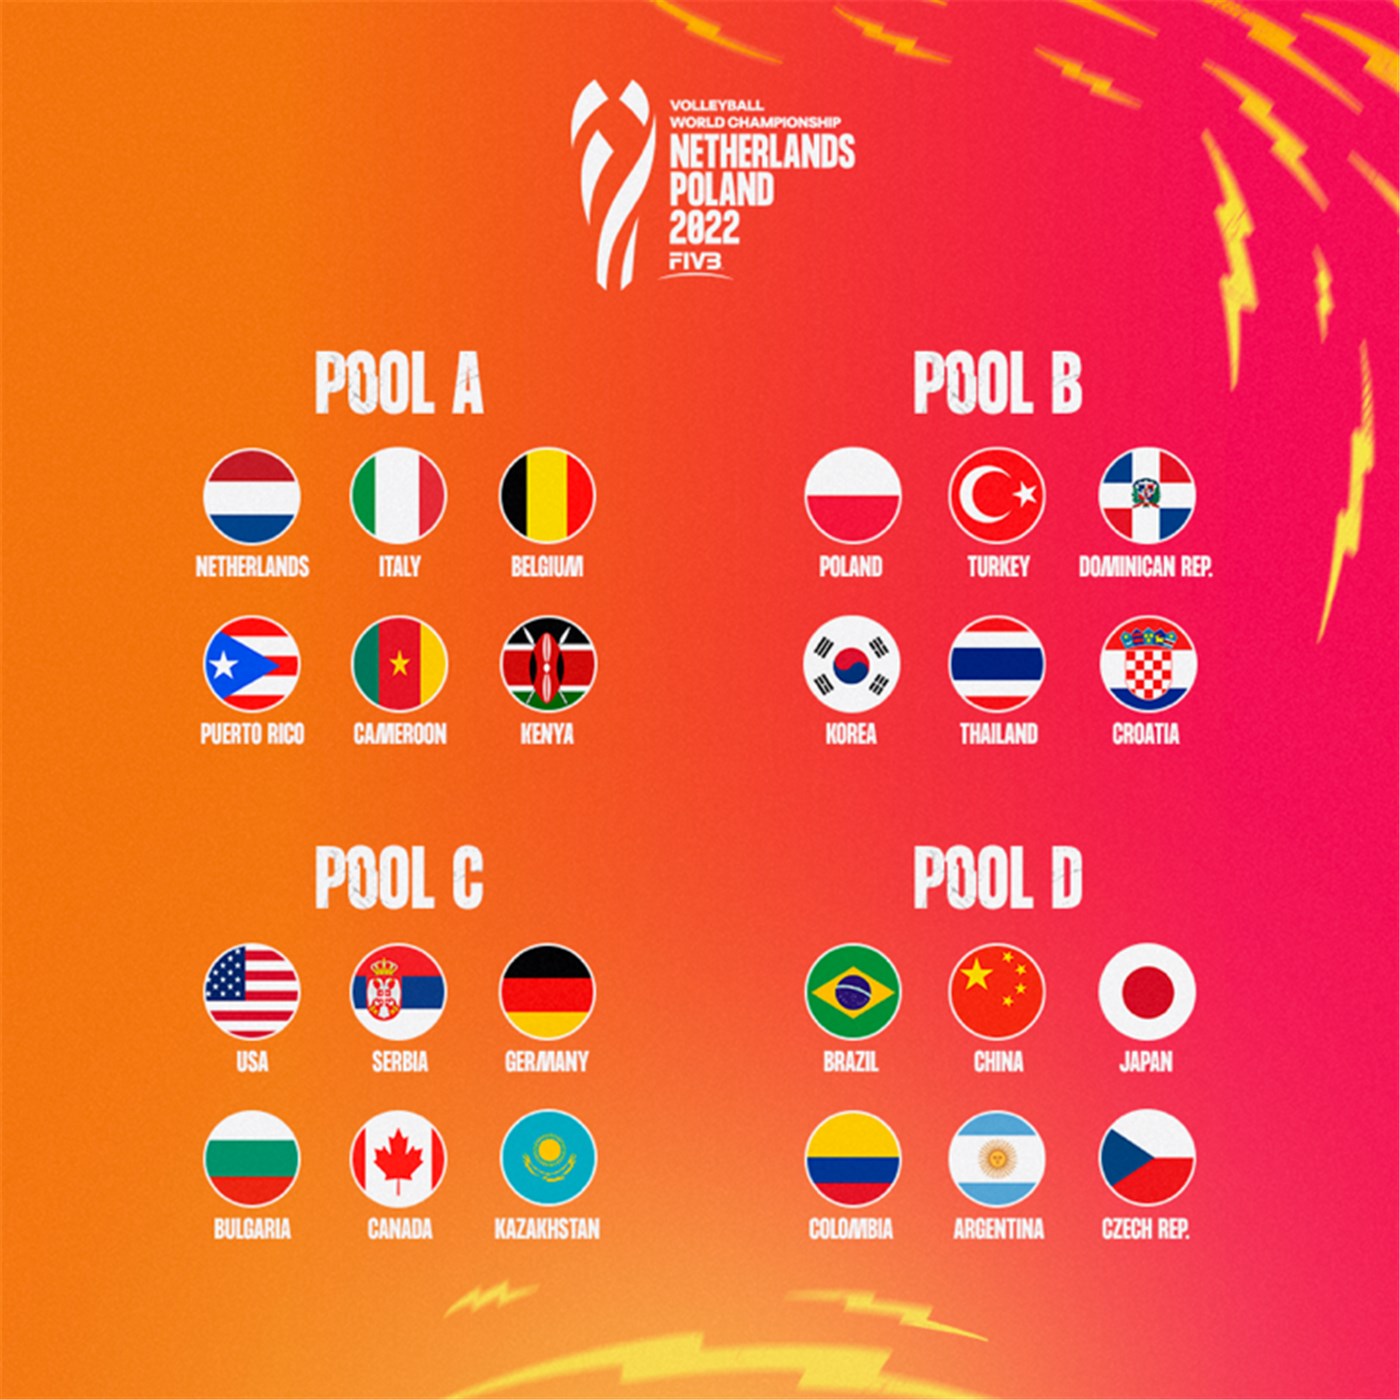 WorldofVolley Draw for 2022 Womens World Championship over Croatia replaces Russia, competition formula modified